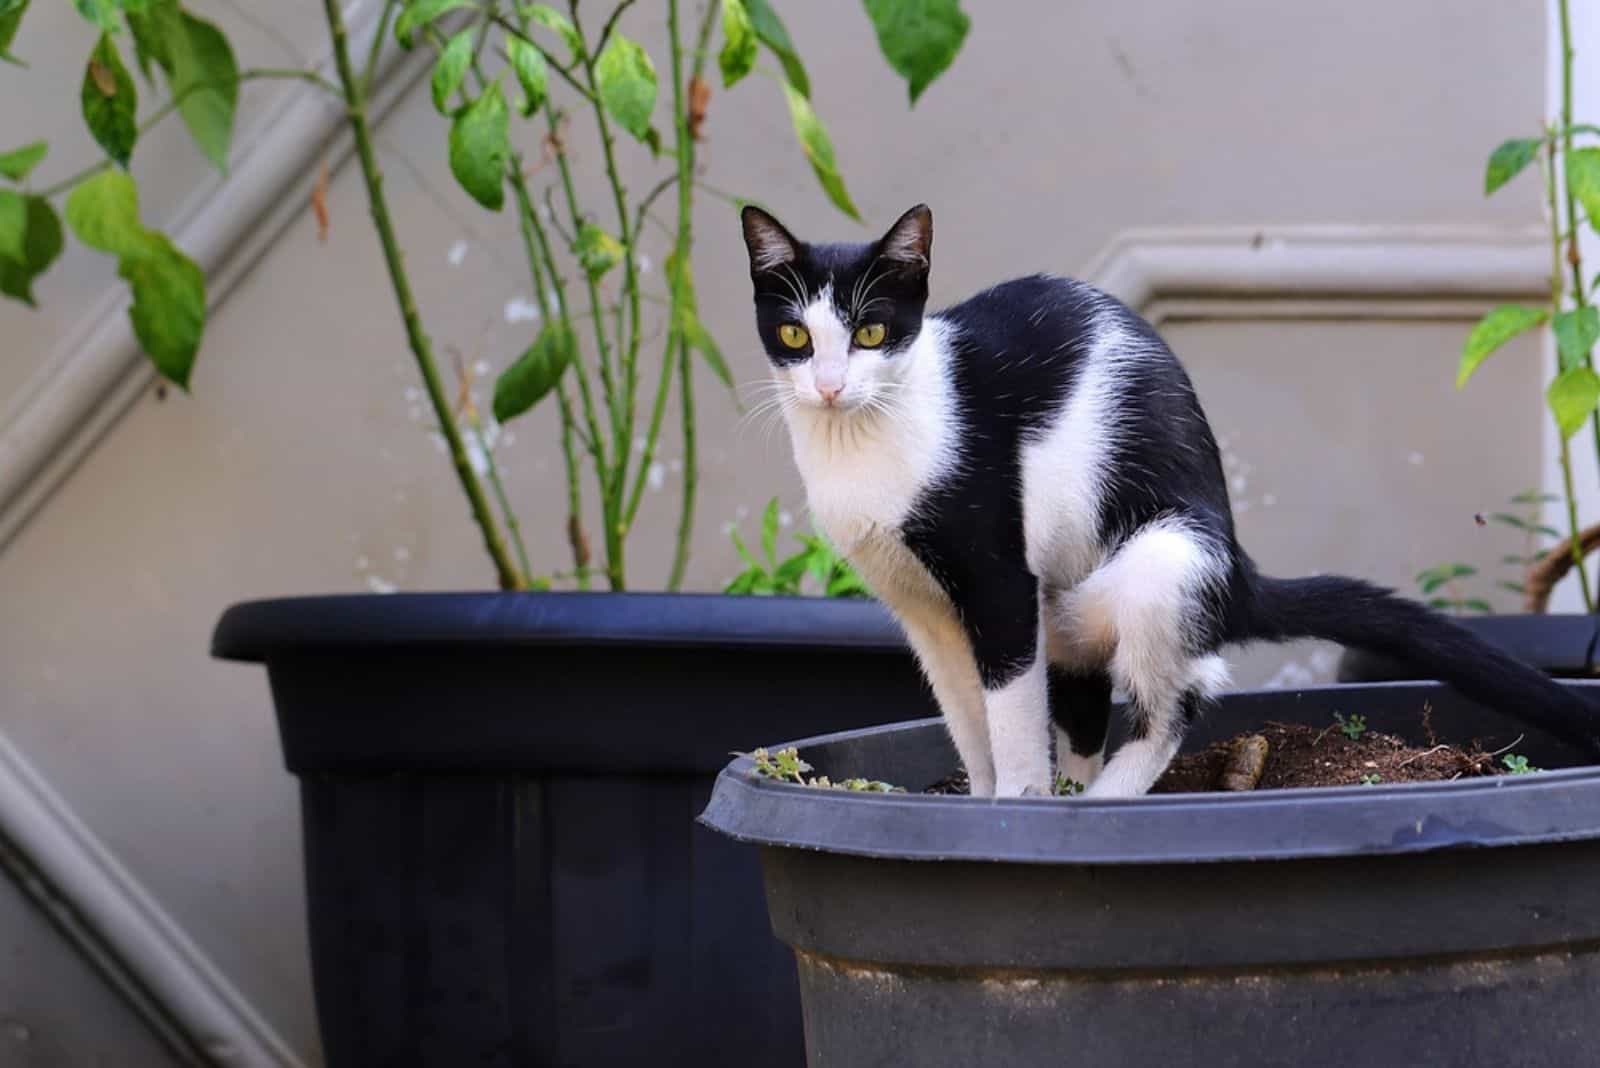 A cat pooping on the pot